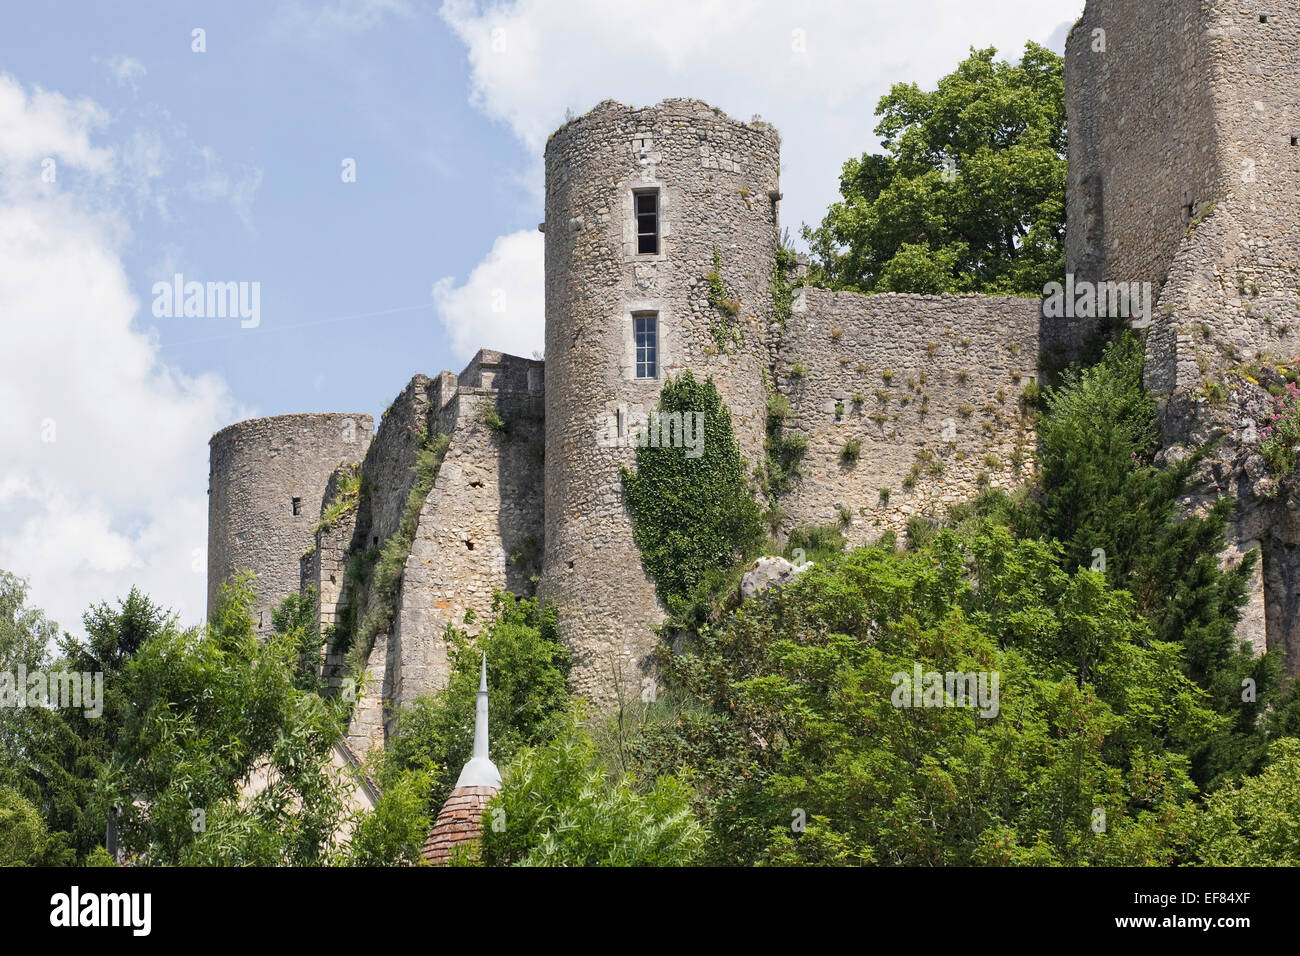 Castle ruins at Angles sur l'Anglin, Vienne, France. Stock Photo